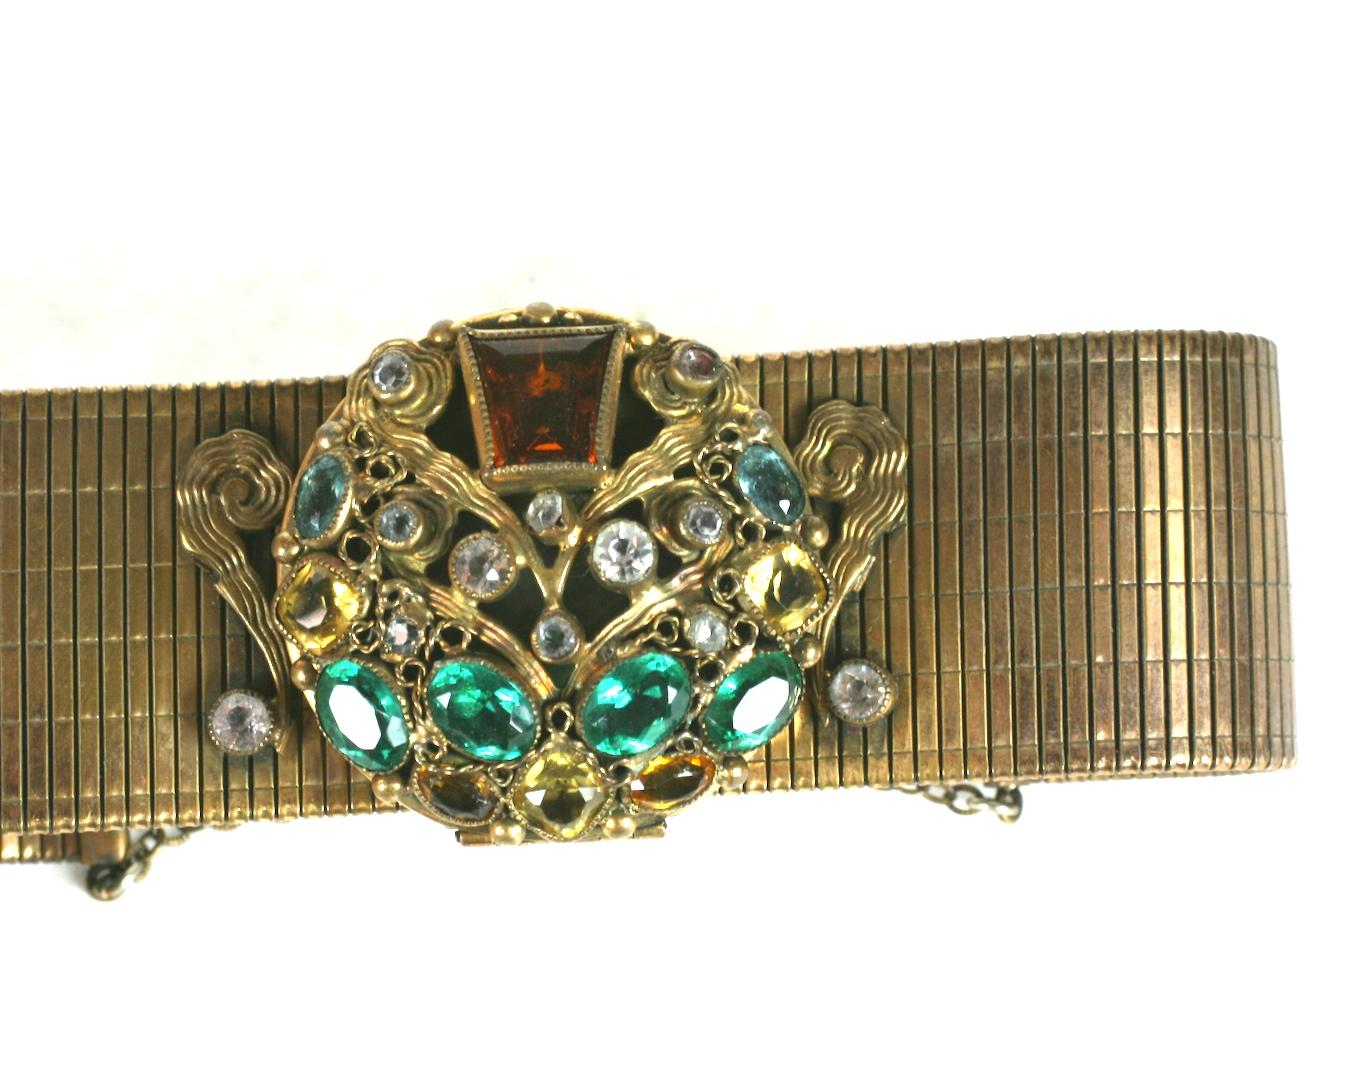 Unusual Sandor Art Deco Compact Bracelet made in the 1930's with a jeweled face. Pastes in emerald, topaz, aqua and citrine are elaborately set onto the face of the compact.
The central motif is set on a flexible, ribbed brass bracelet with